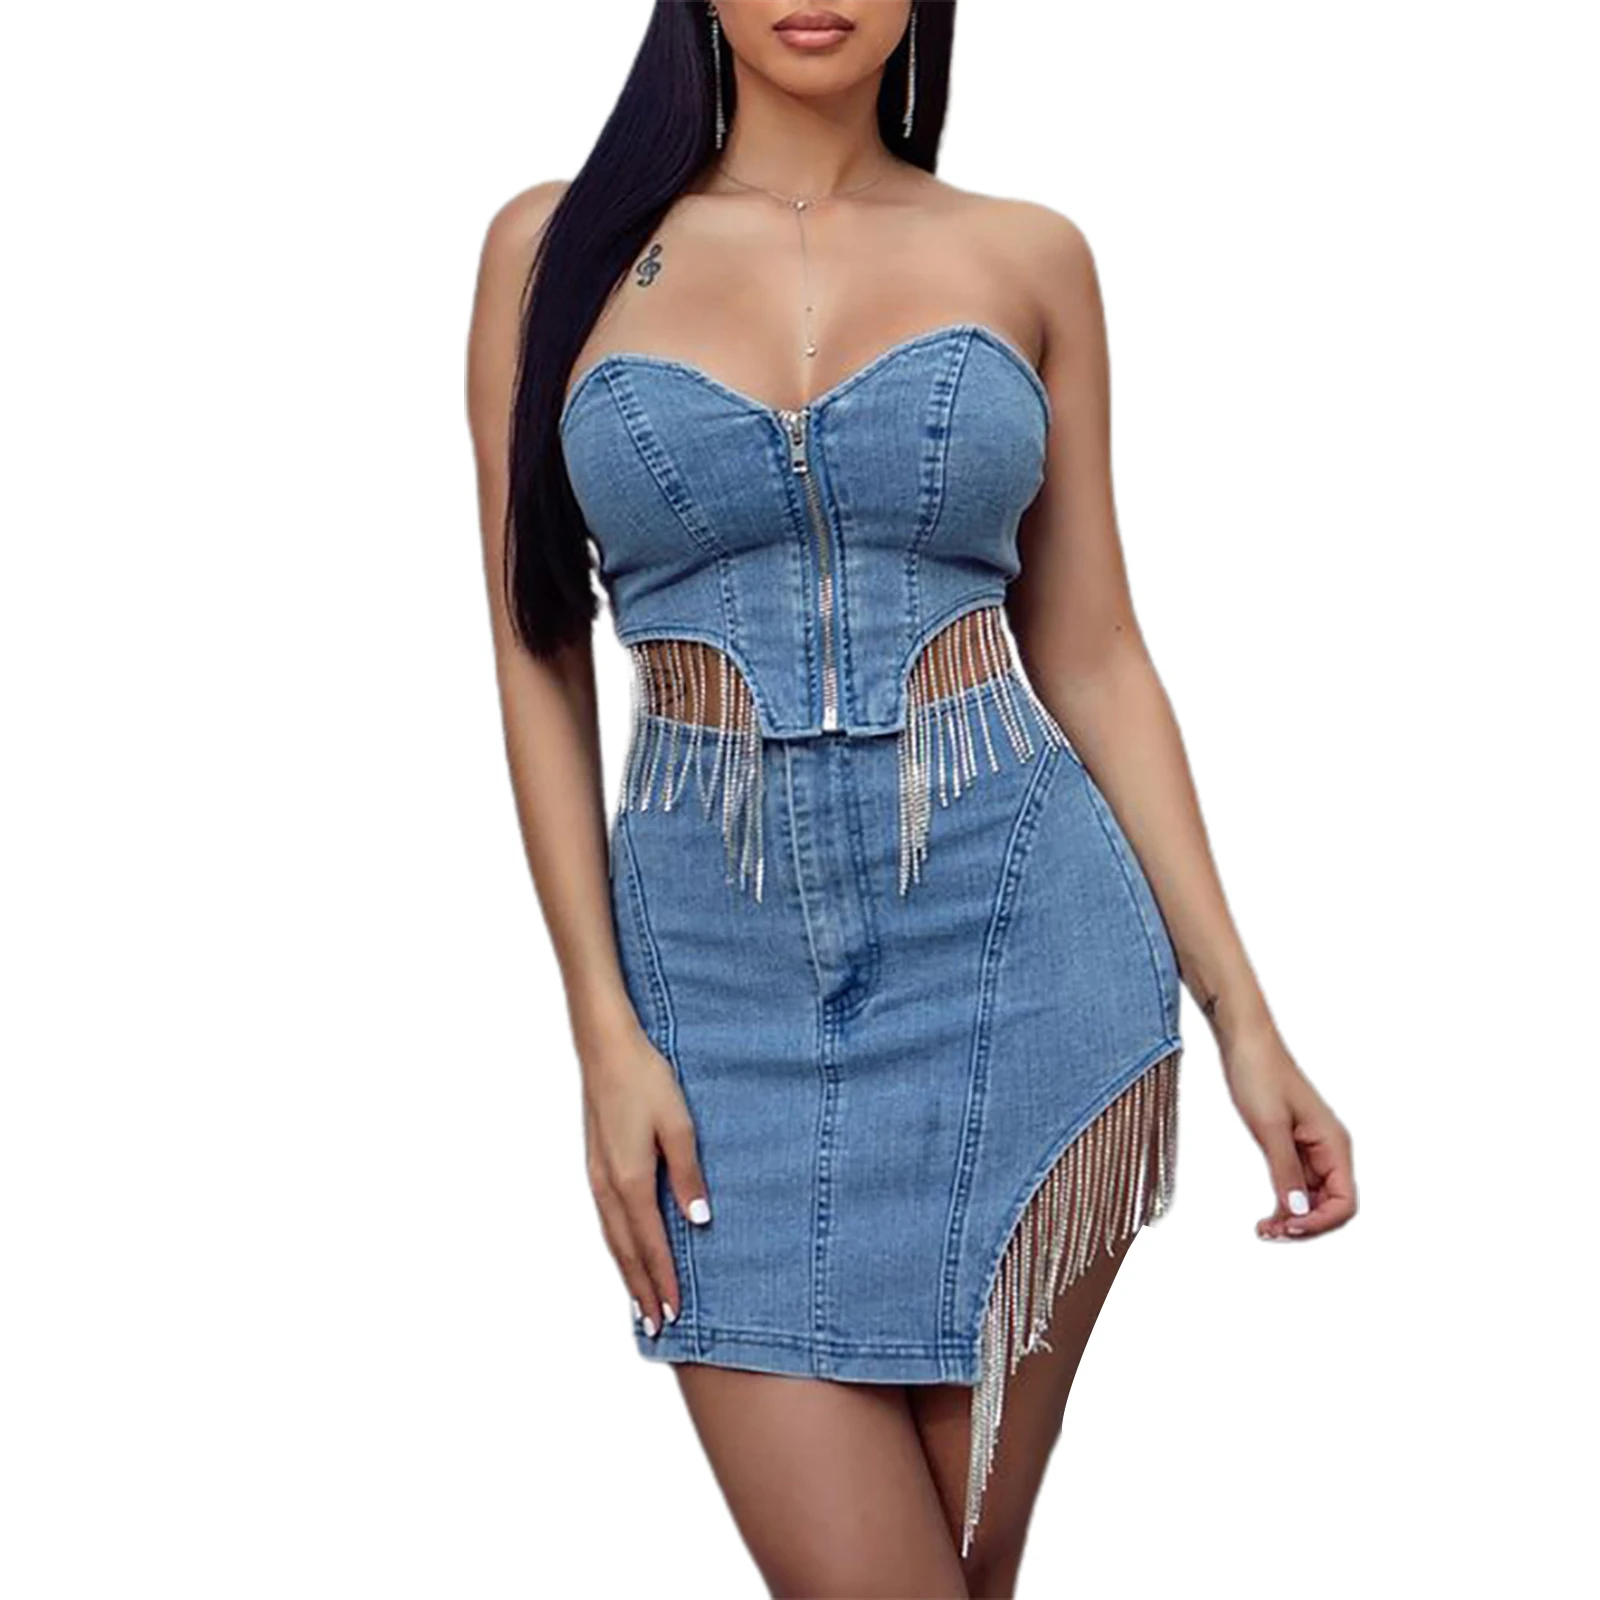 lace bathing suit cover up hirigin 2 Pieces Suit Set Female Tassel Trim Sleeveless Strapless Tops with Zipper Denim Skirt for Club Night 2021 New Fashion swim skirt cover up no brief